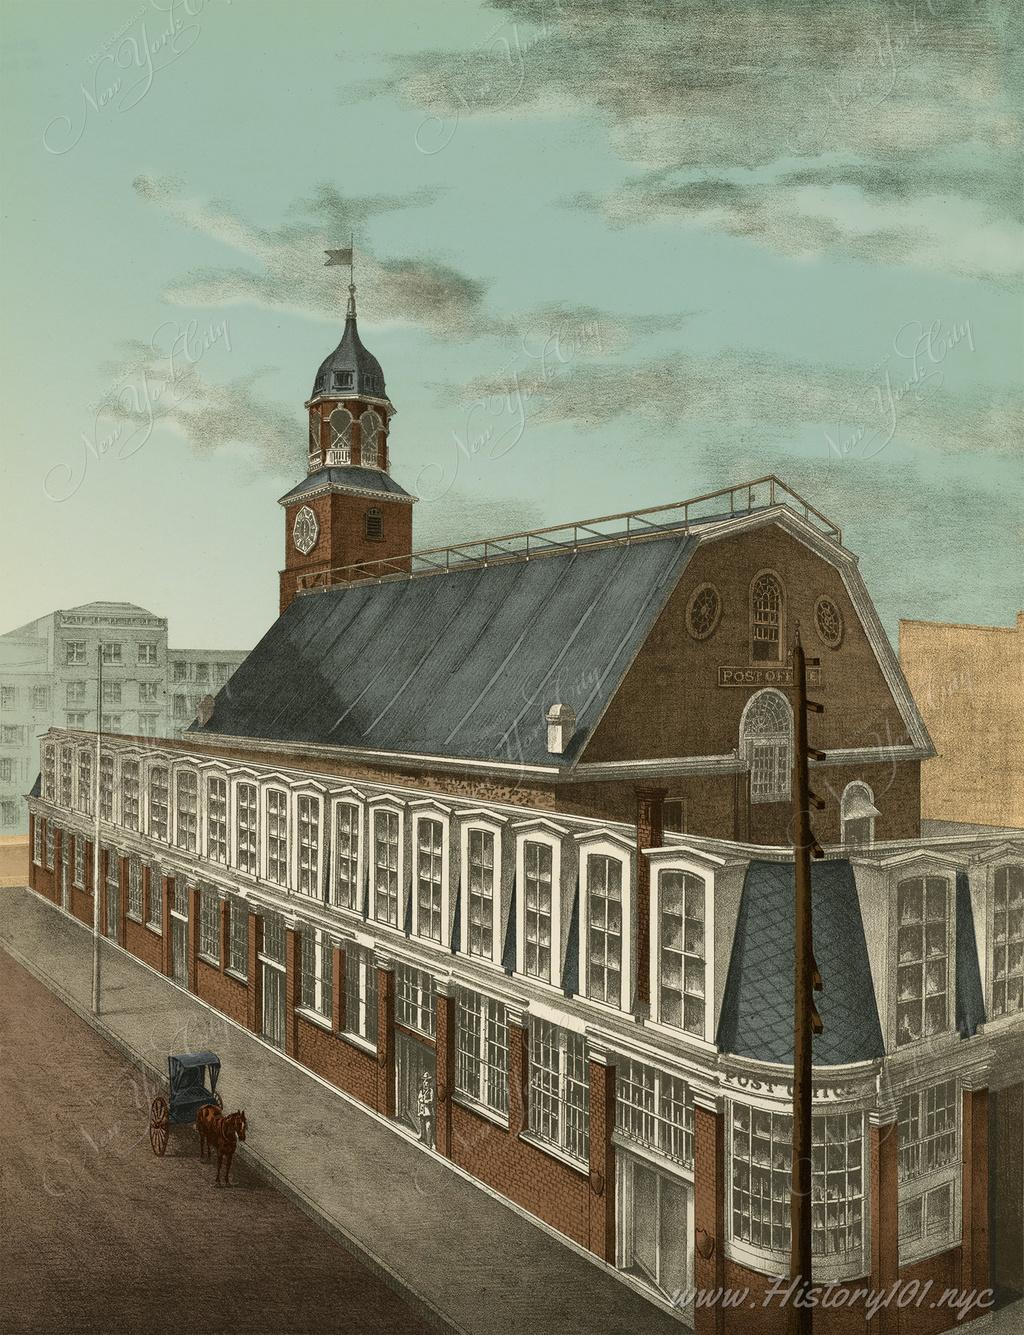 Artist's sketch of one of the city's oldest post office branches which is no longer standing. Artwork by John Briem, colorized by Fine Print.